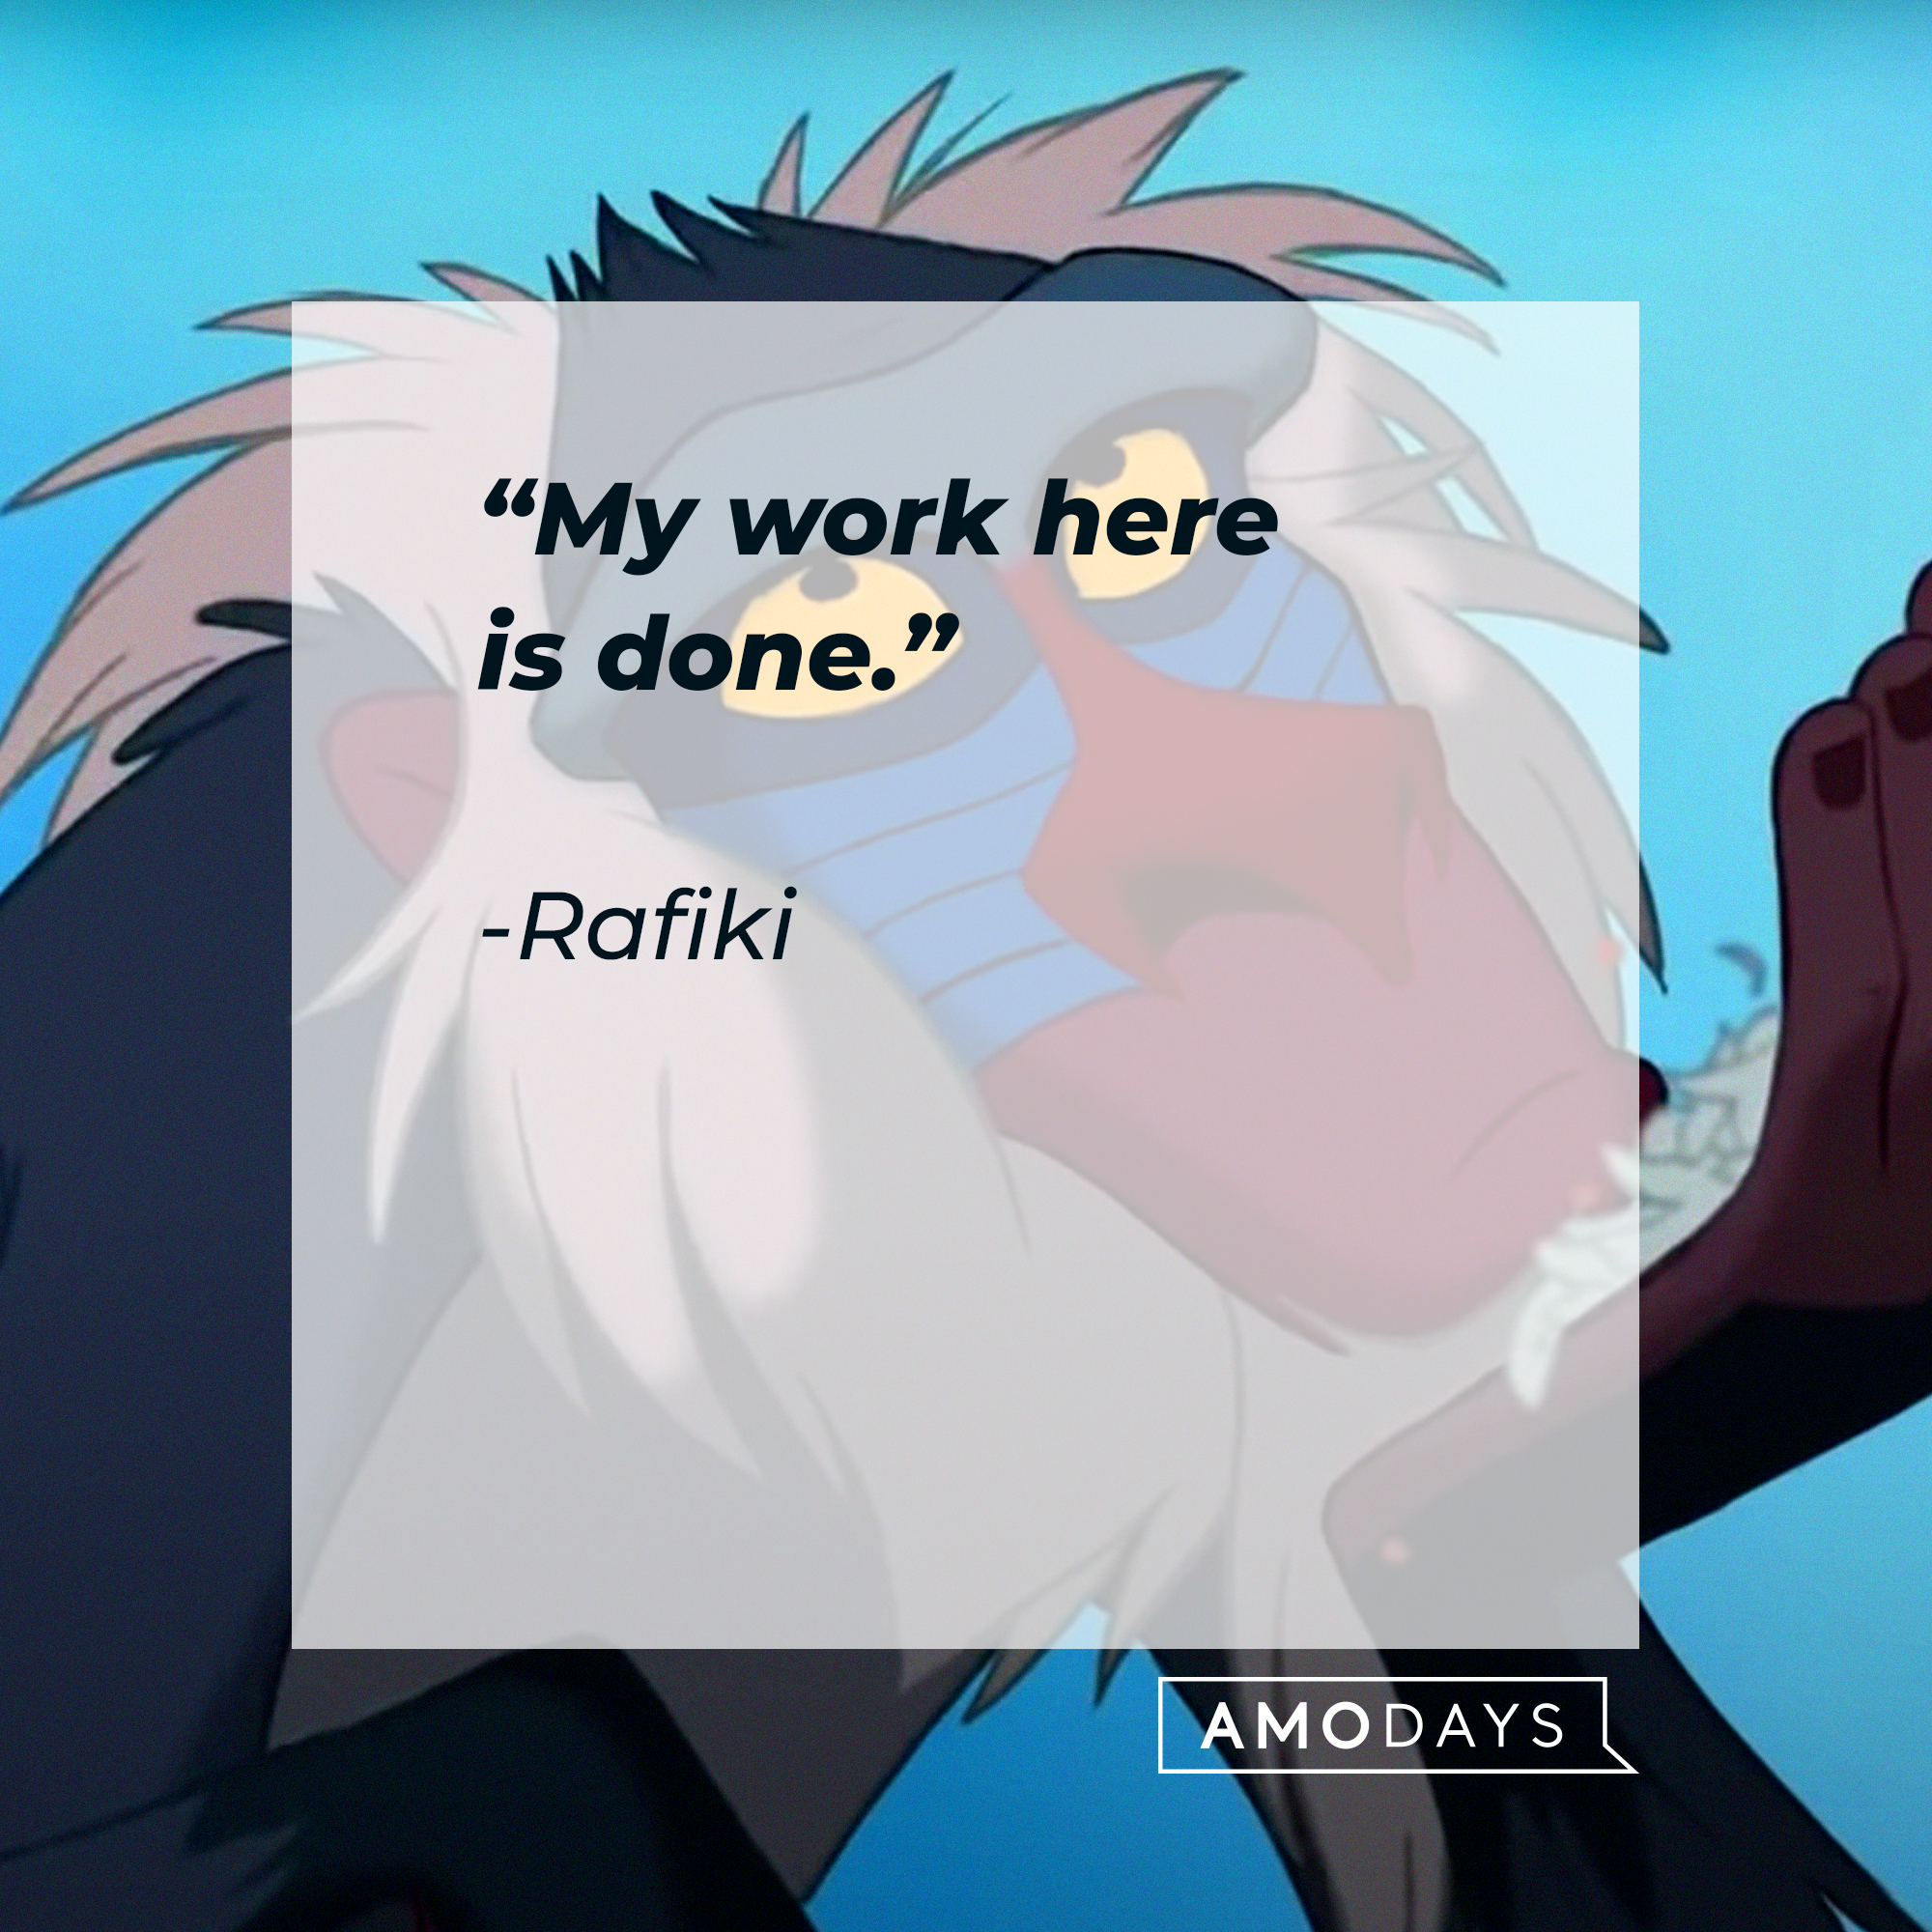 Rafiki's quote: "My work here is done." | Source: Facebook/DisneyTheLionKing